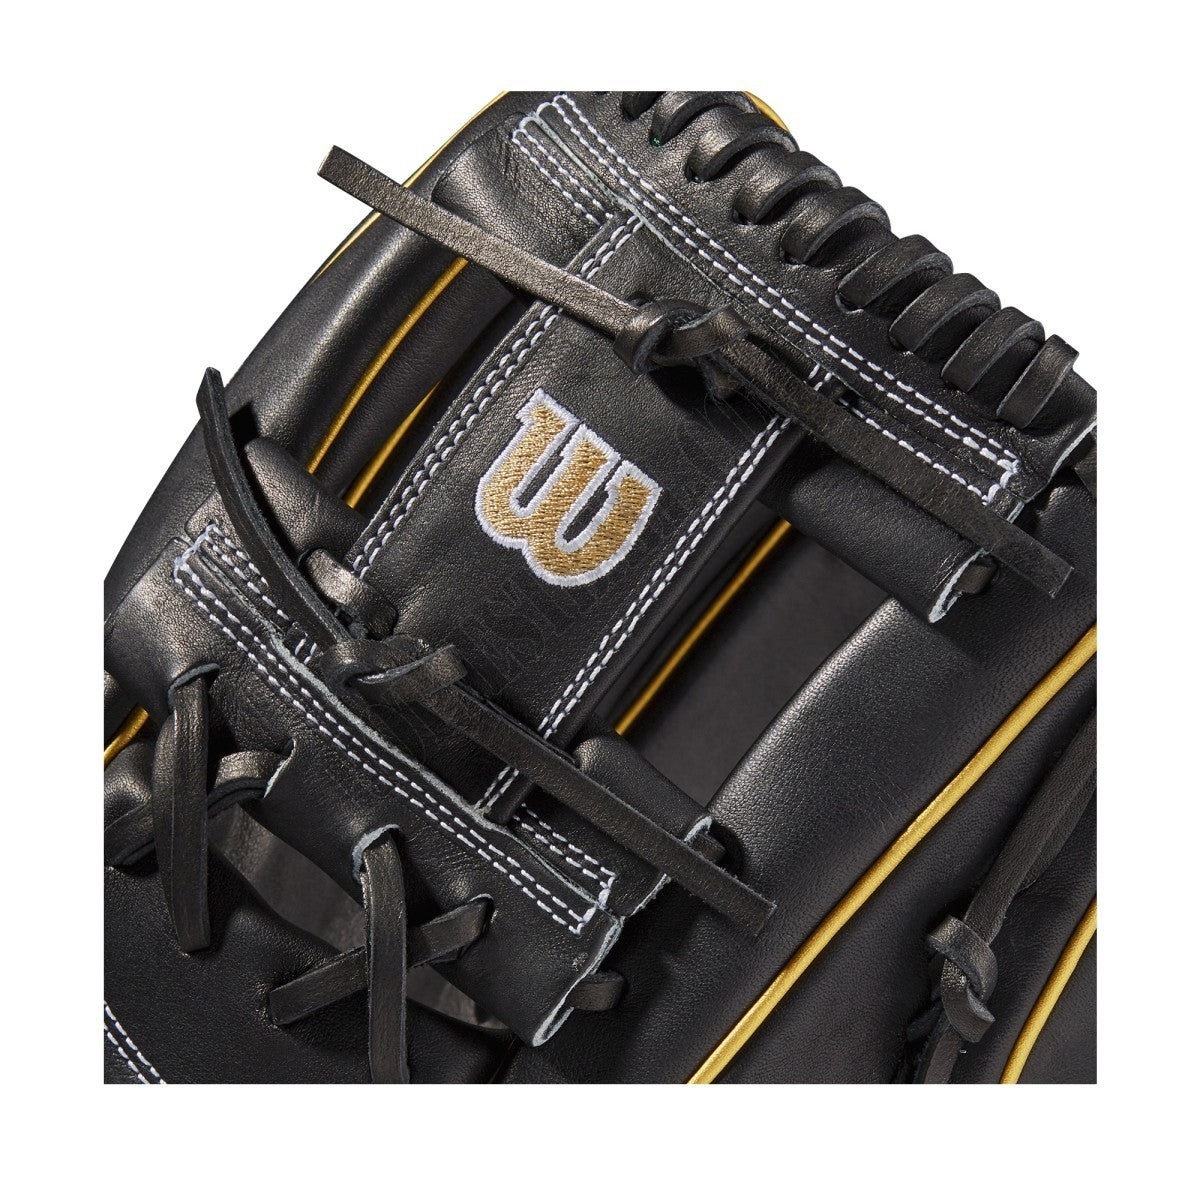 2021 A2000 H75 11.75" Infield Fastpitch Glove ● Wilson Promotions - -5